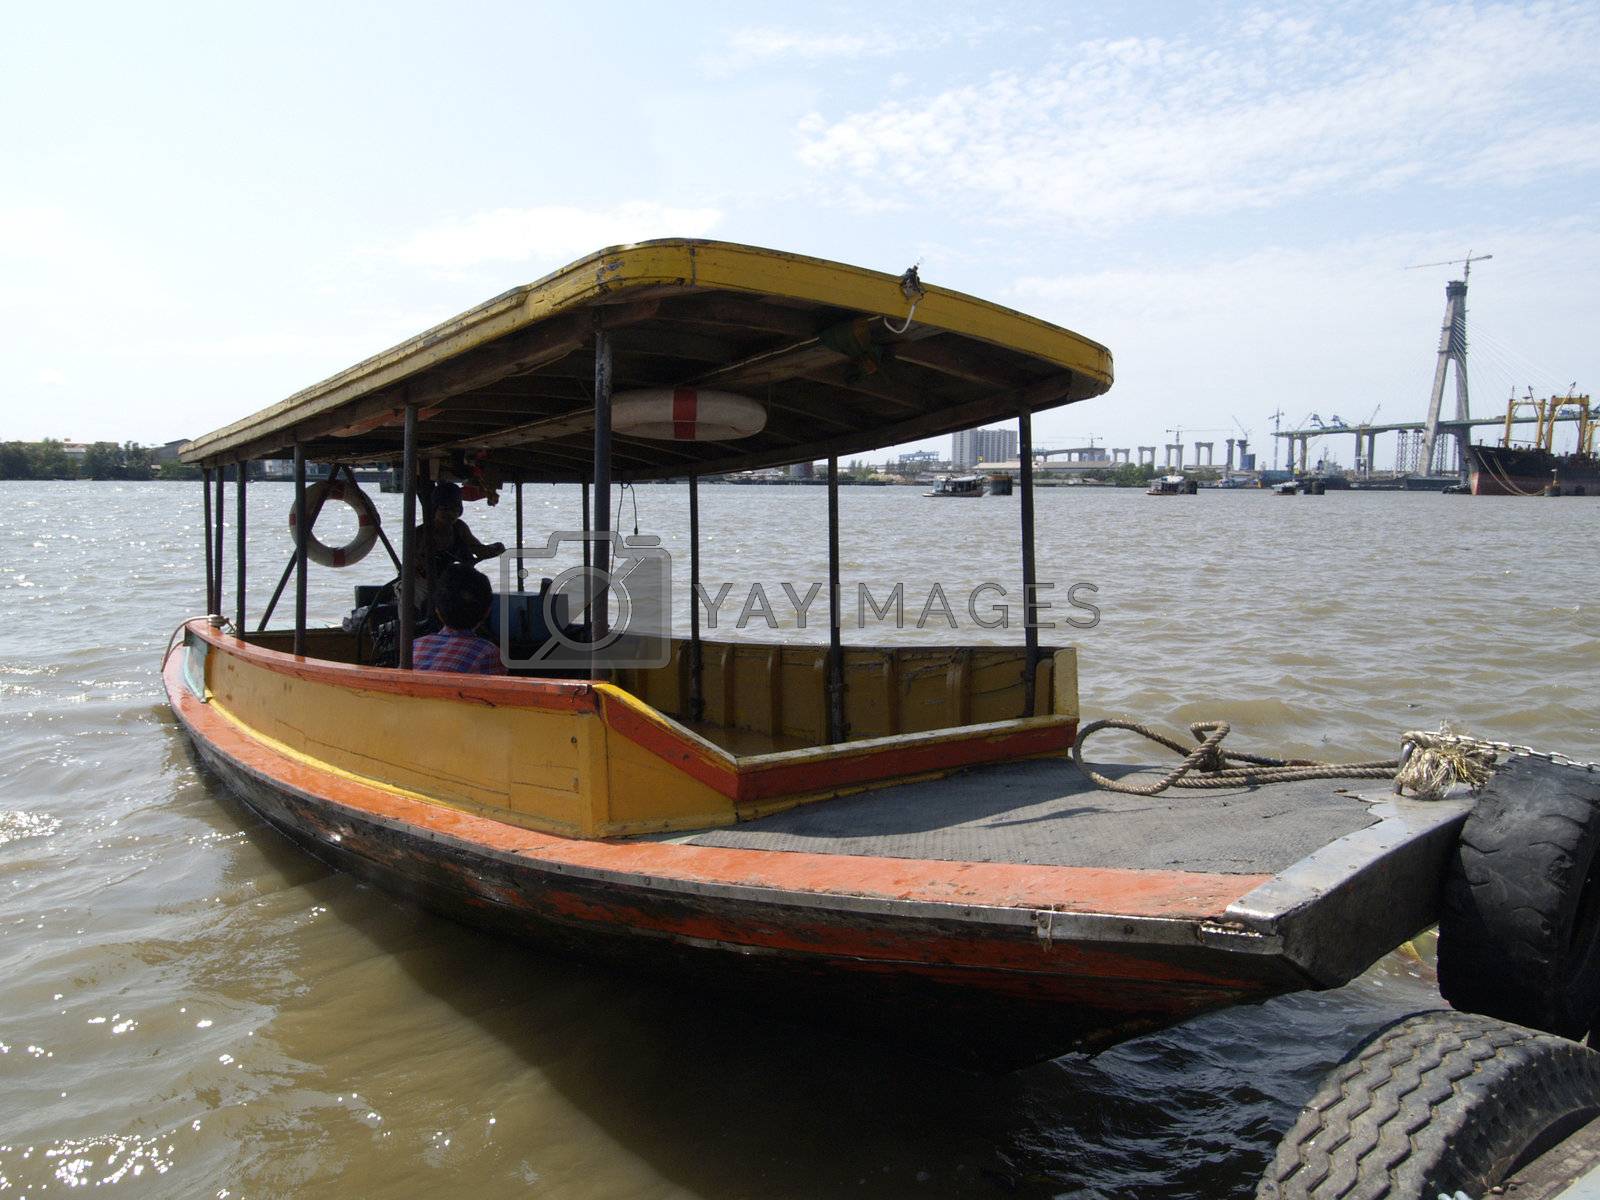 Royalty free image of Small passenger ferry by epixx